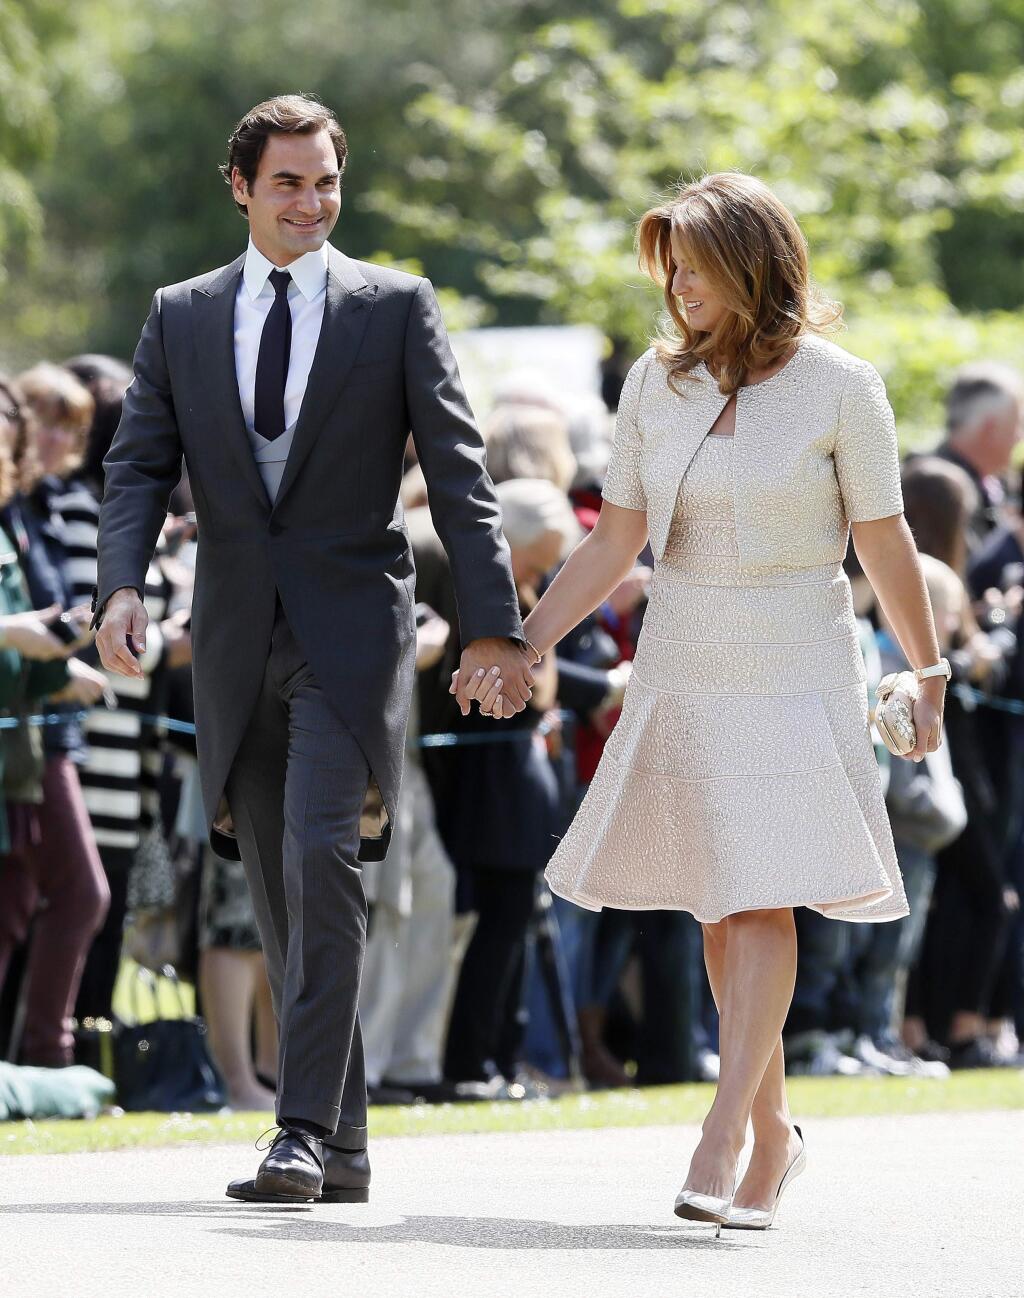 Swiss tennis player Roger Federer and his wife Mirka arrive at St Mark's Church in Englefield, England, ahead of the wedding of Pippa Middleton and James Matthews, Saturday, May 20, 2017. Middleton, the sister of Kate, Duchess of Cambridge is to marry hedge fund manager James Matthews in a ceremony Saturday where her niece and nephew Prince George and Princess Charlotte are in the wedding party, along with sister Kate and princes Harry and William. (AP Photo/Kirsty Wigglesworth, Pool)